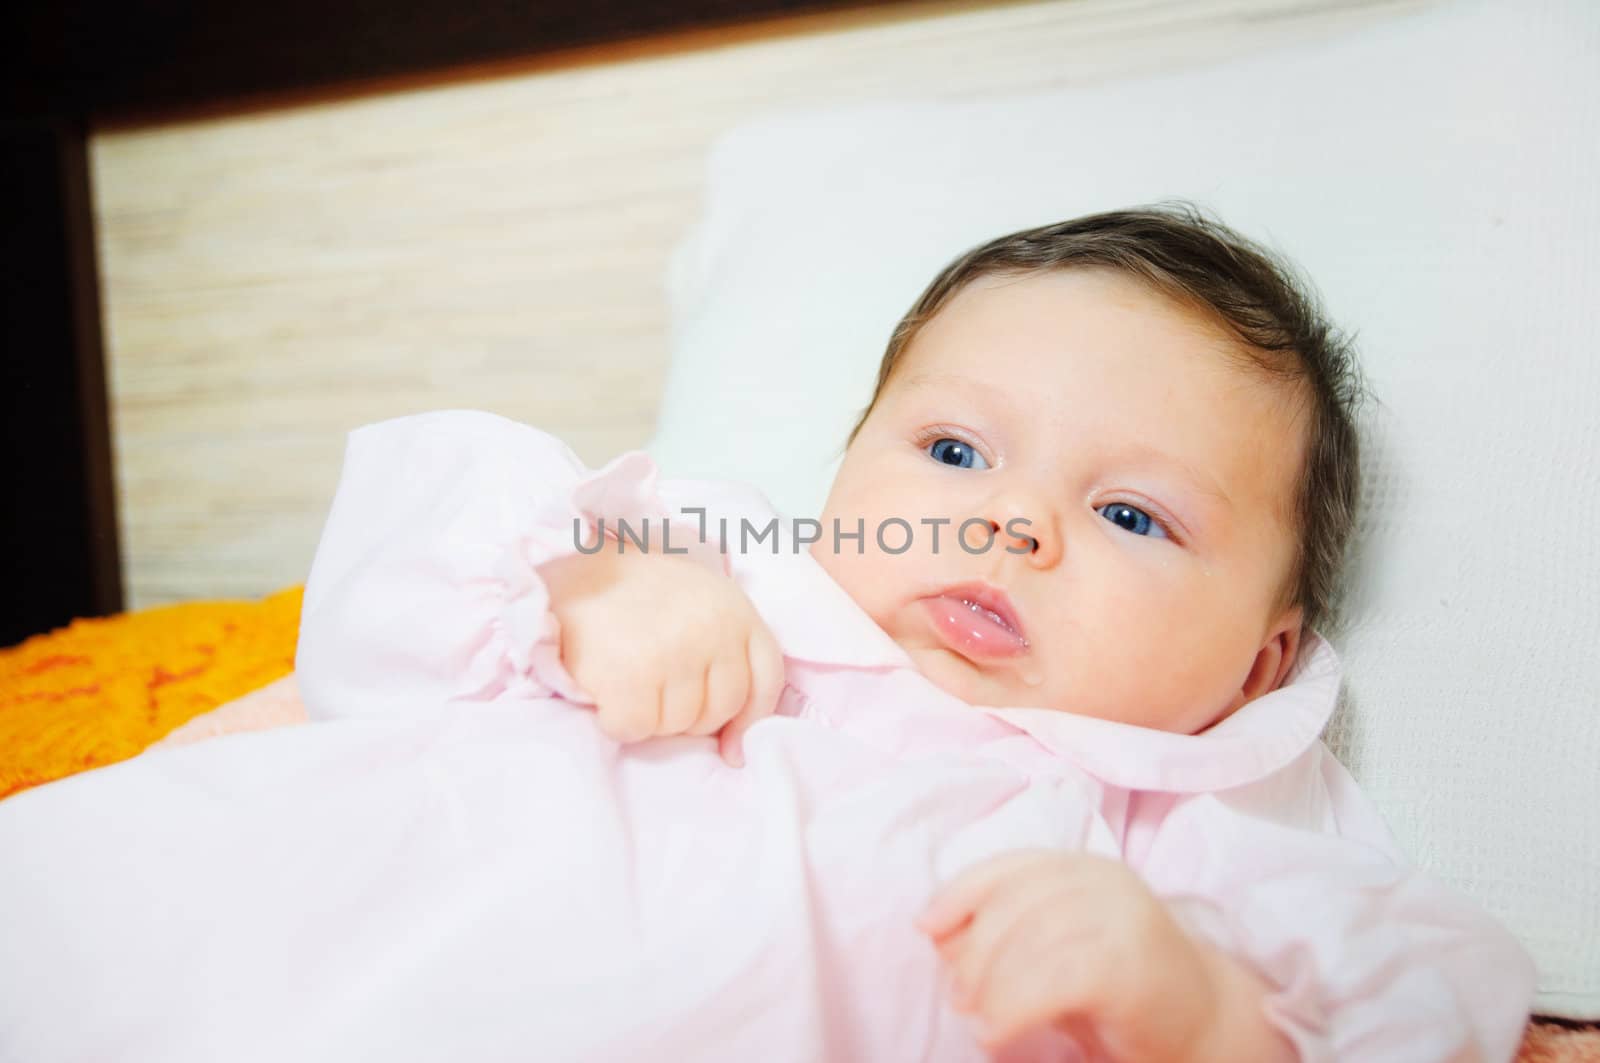 Beautiful cute baby girl is lying in a bed.